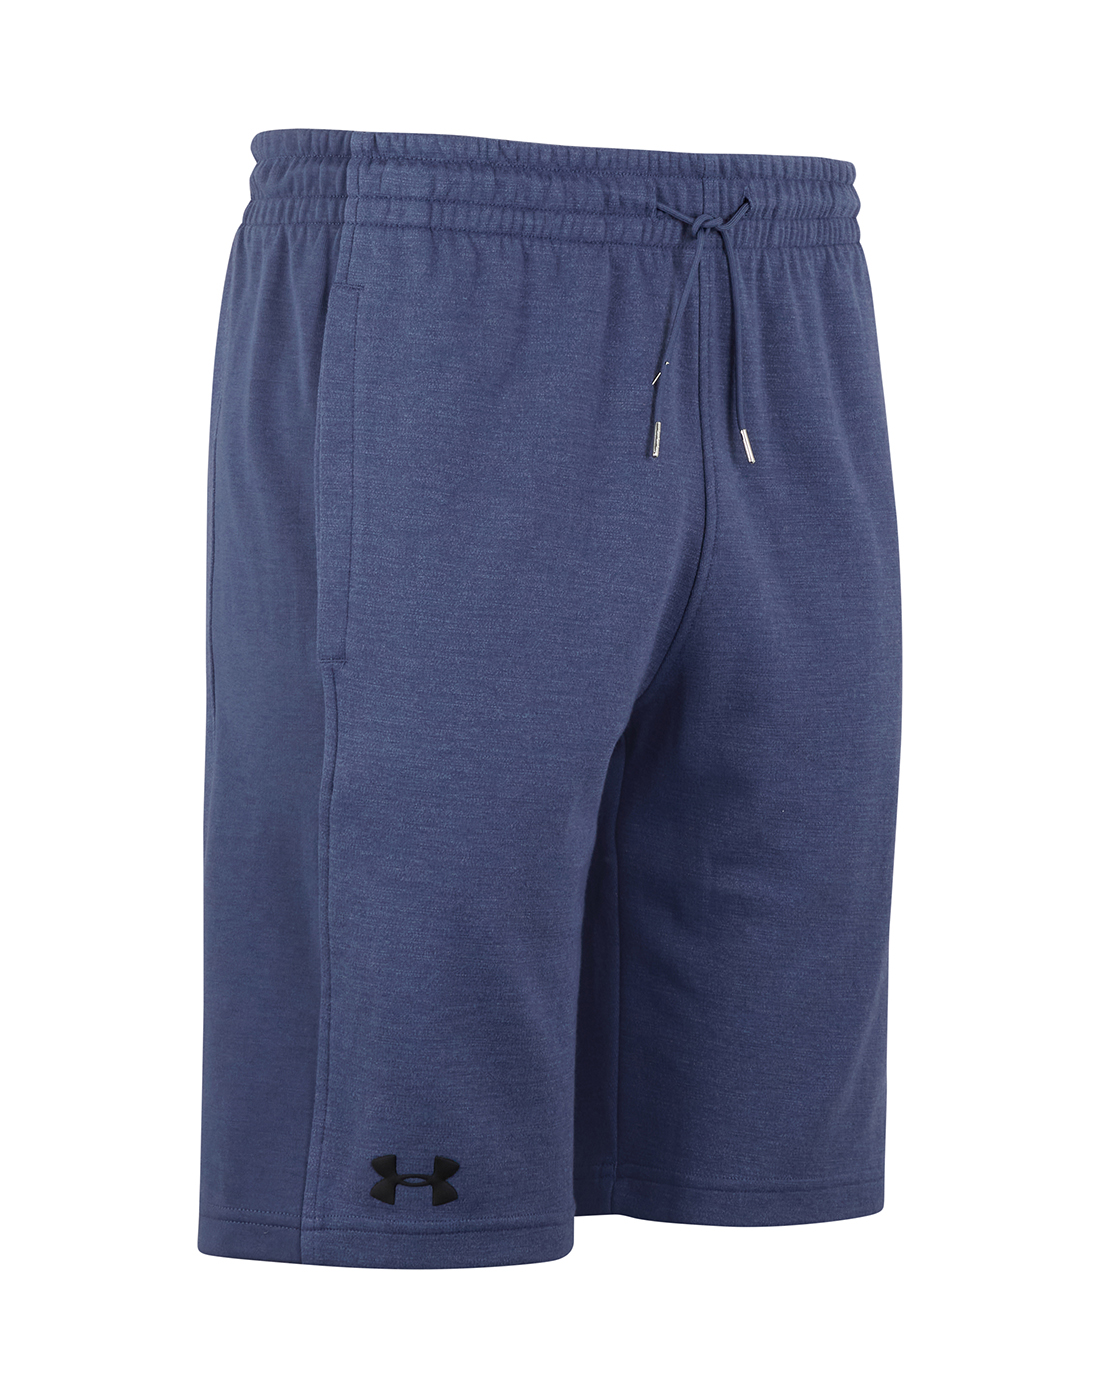 Under Armour Mens Double Knit Shorts - Blue | Life Style Sports IE